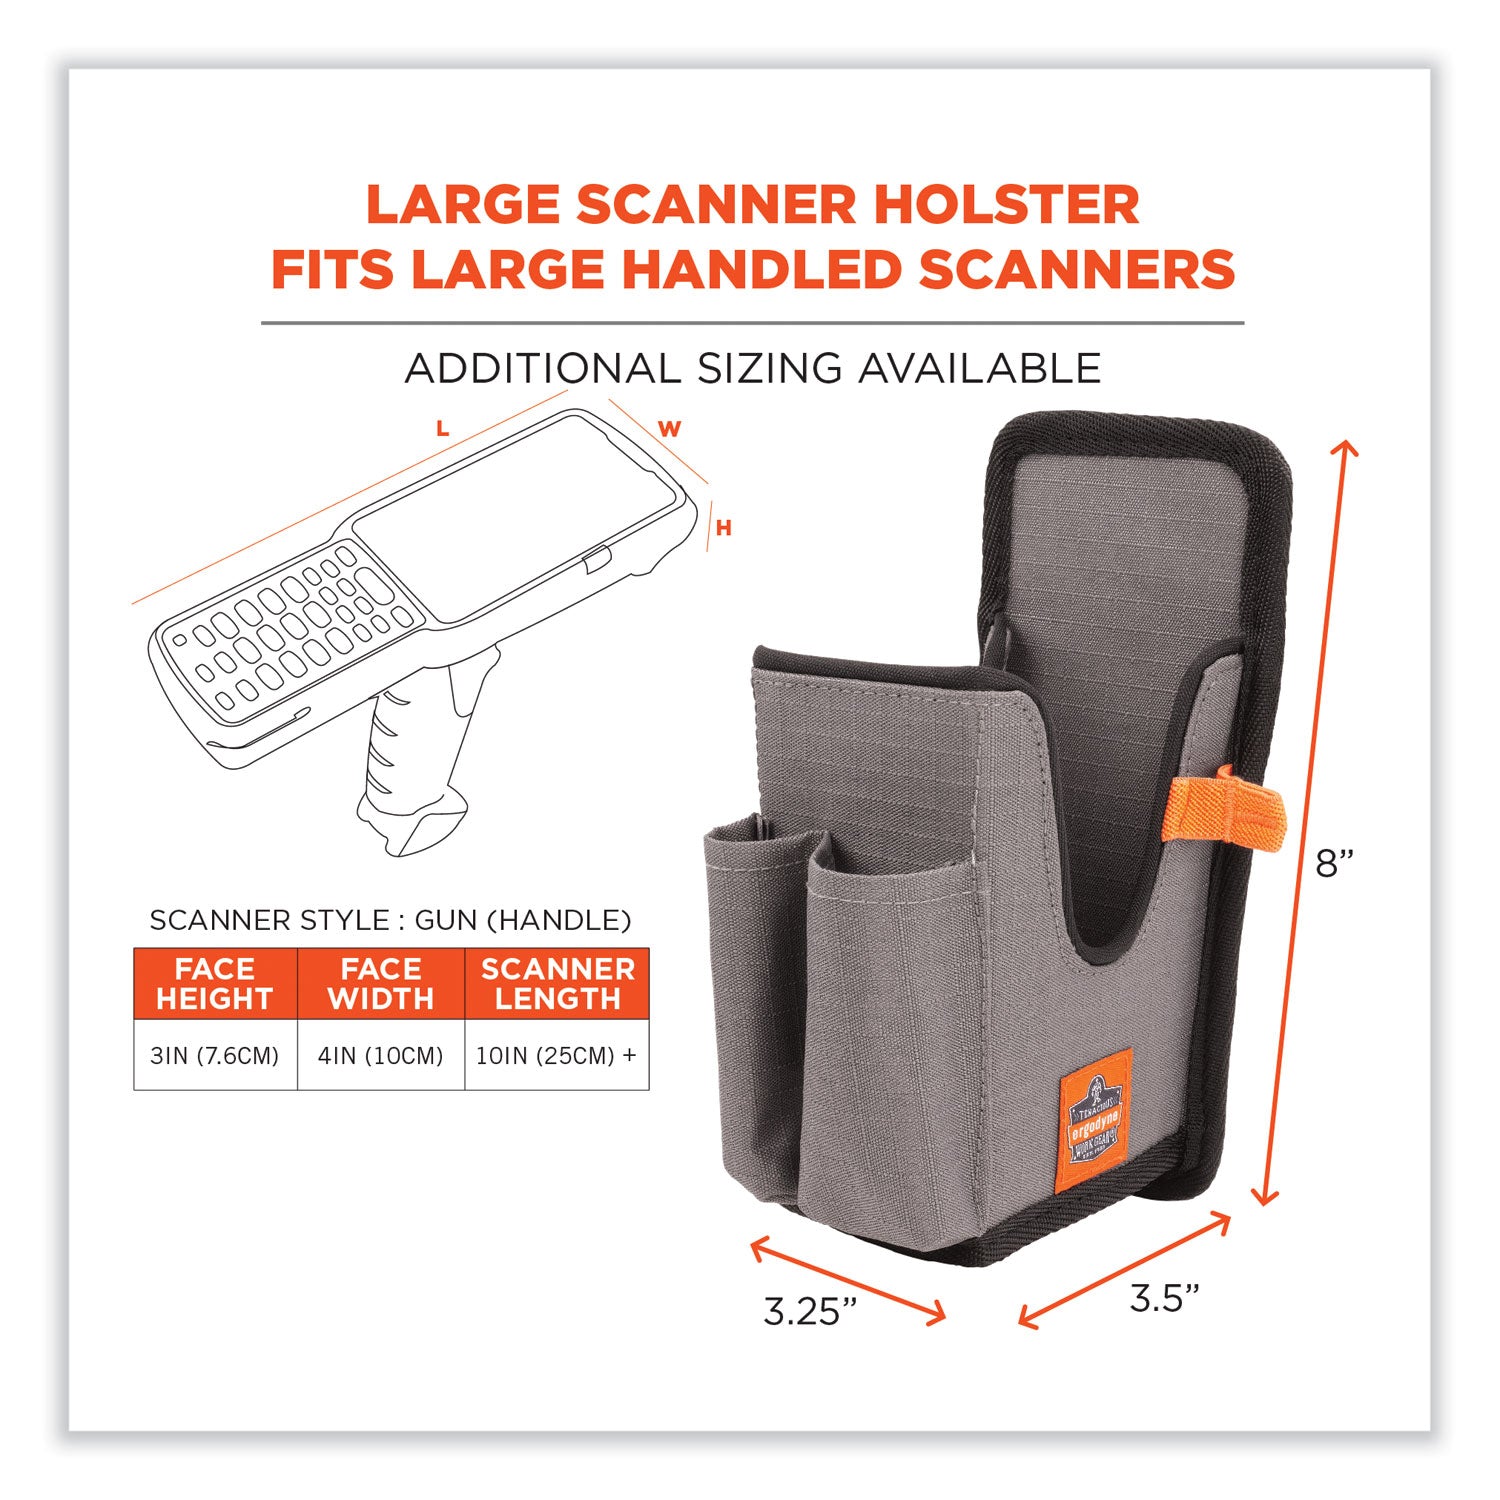 squids-5541-handheld-barcode-scanner-holster-w-belt-clip-large-2-comp-275x35x8polyestergrayships-in-1-3-business-days_ego19183 - 3